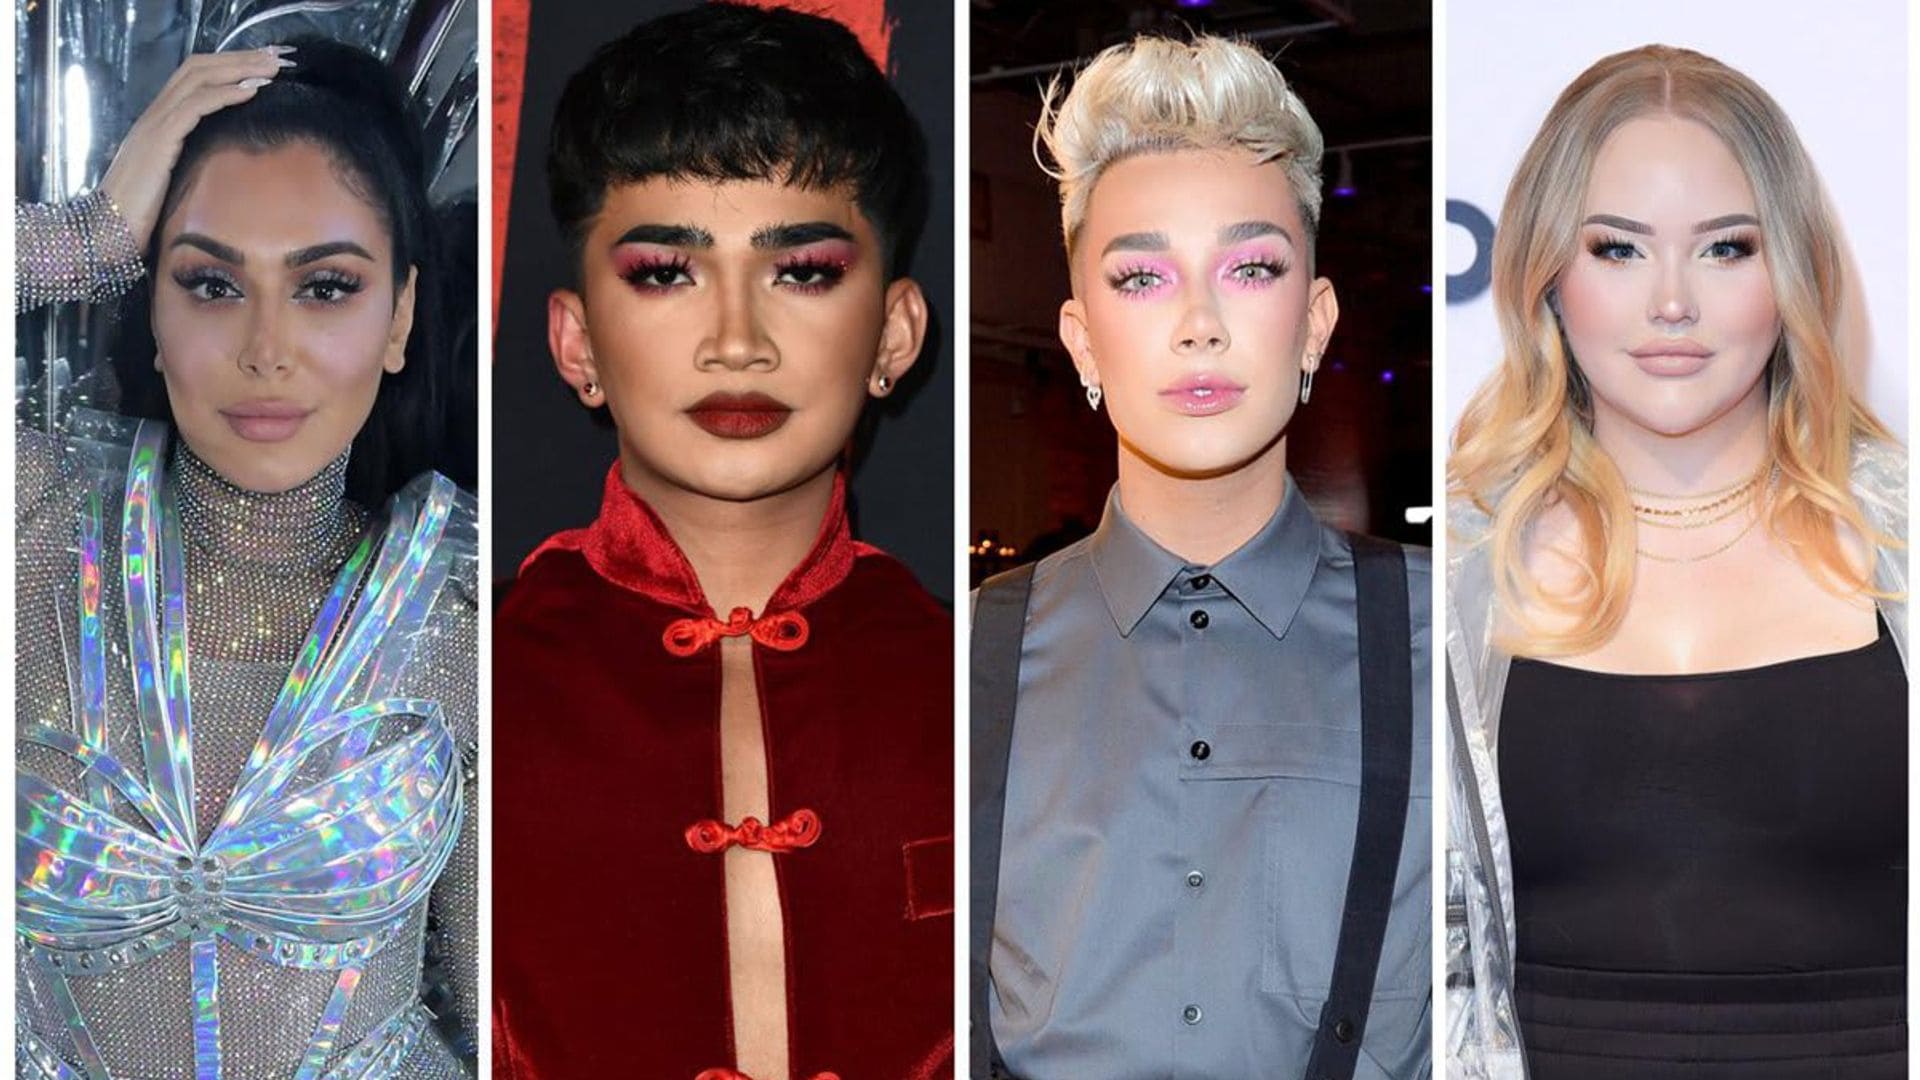 2021 top 10 most affluent beauty influencers across TikTok, Instagram, and Youtube